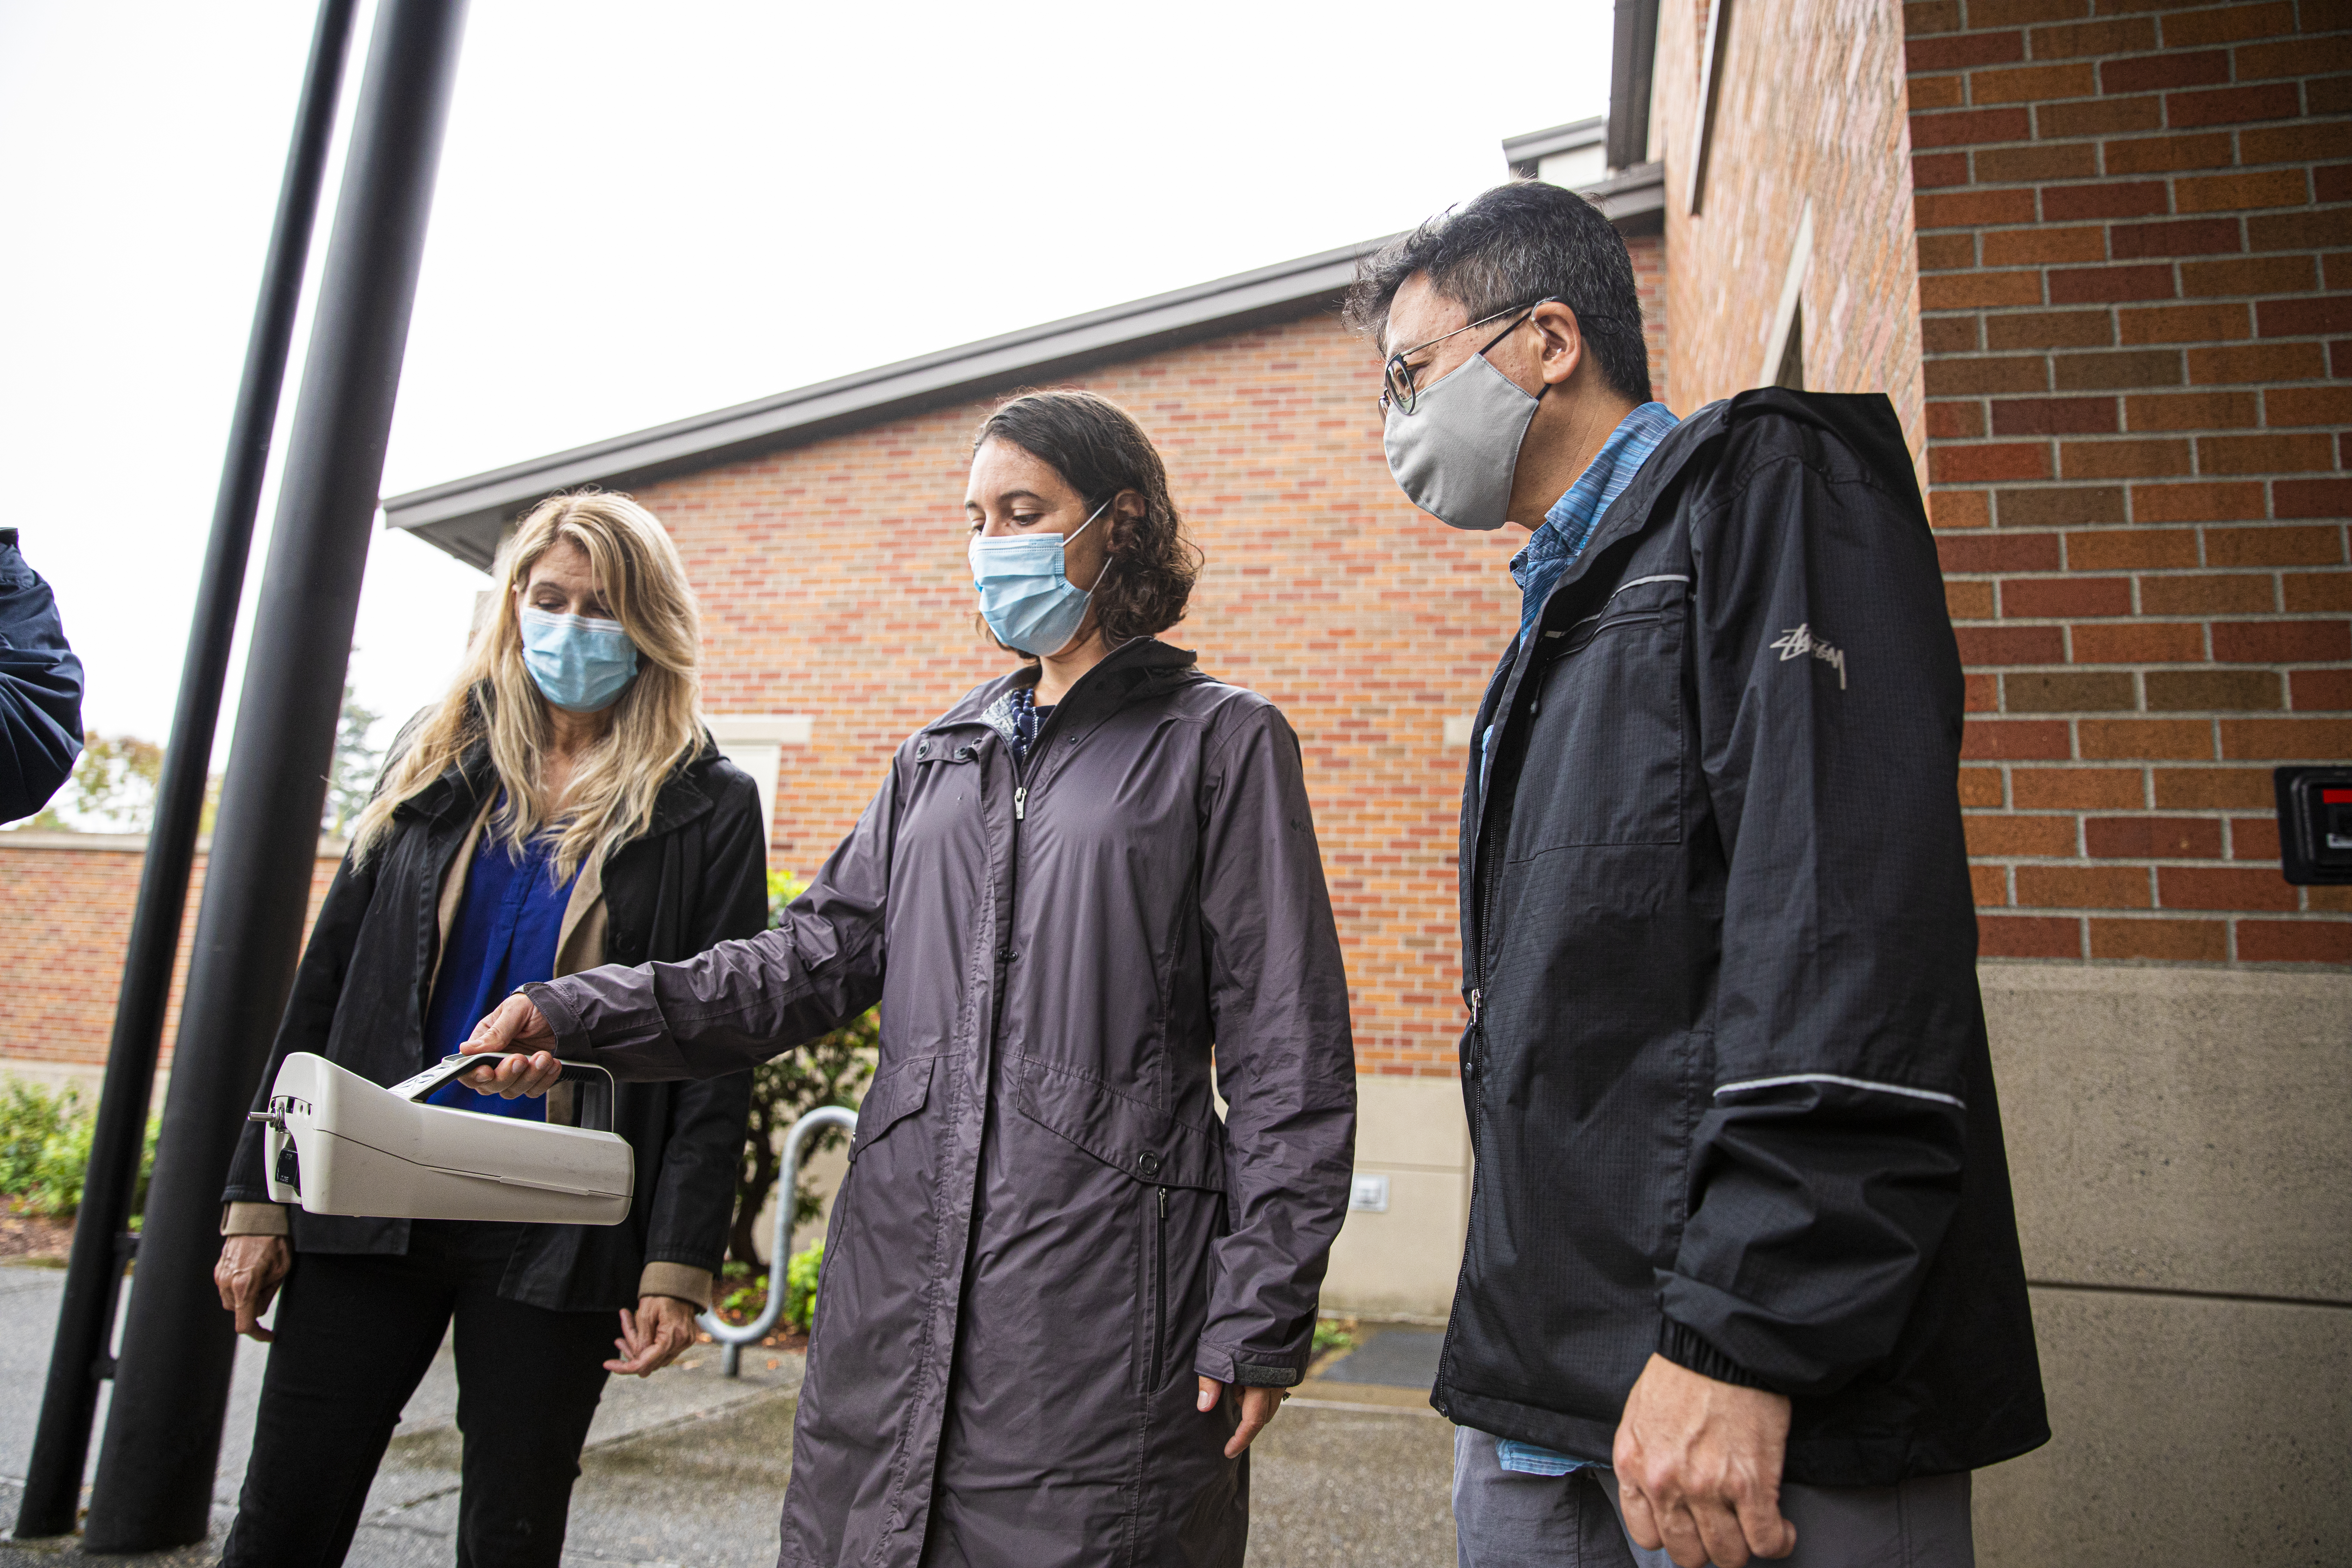 Three researchers standing side-by-side. The researcher in the middle is holding a air sampling device